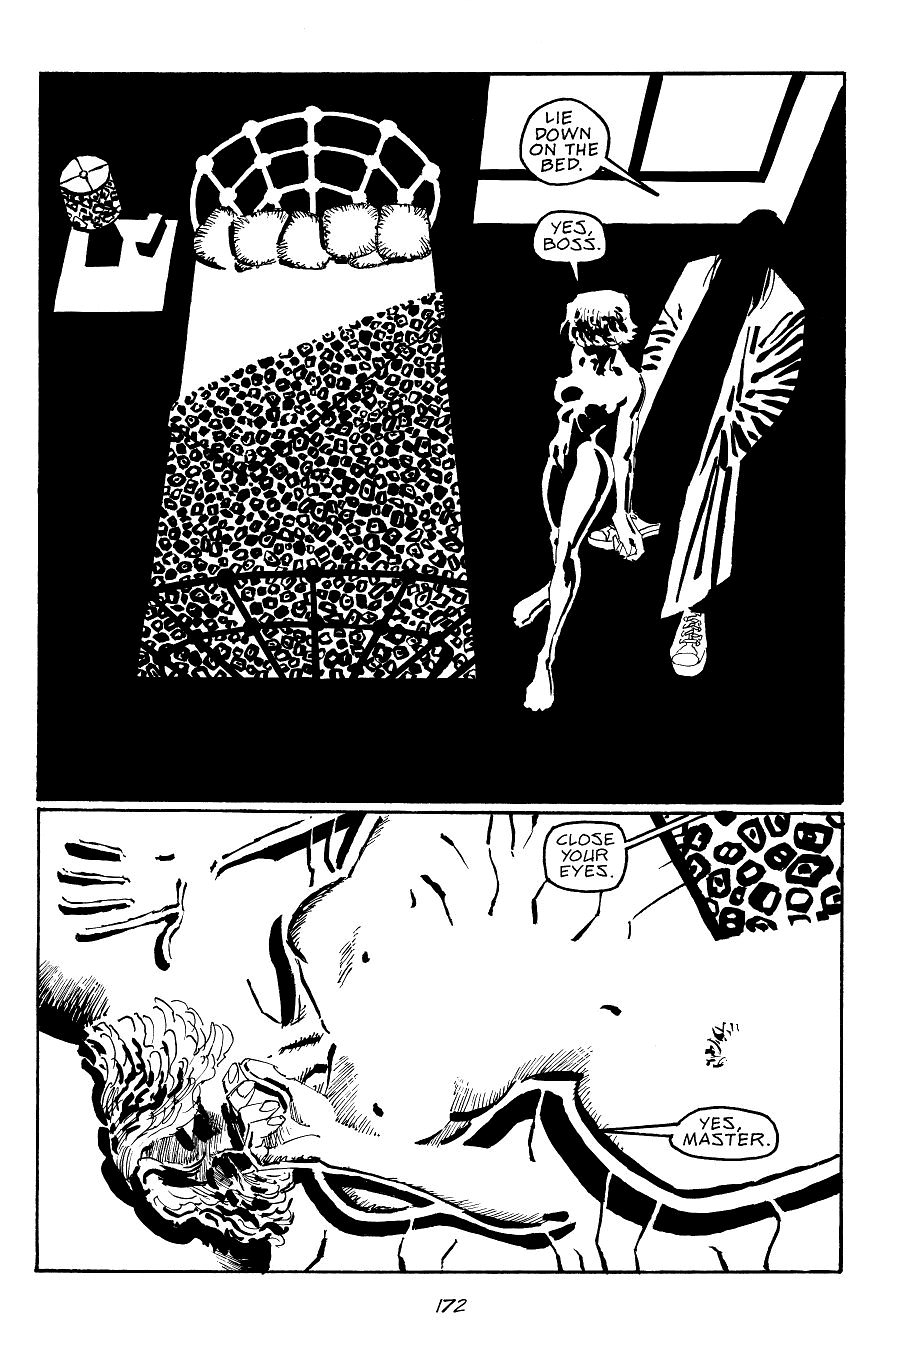 page 172 of sin city 7 hell and back